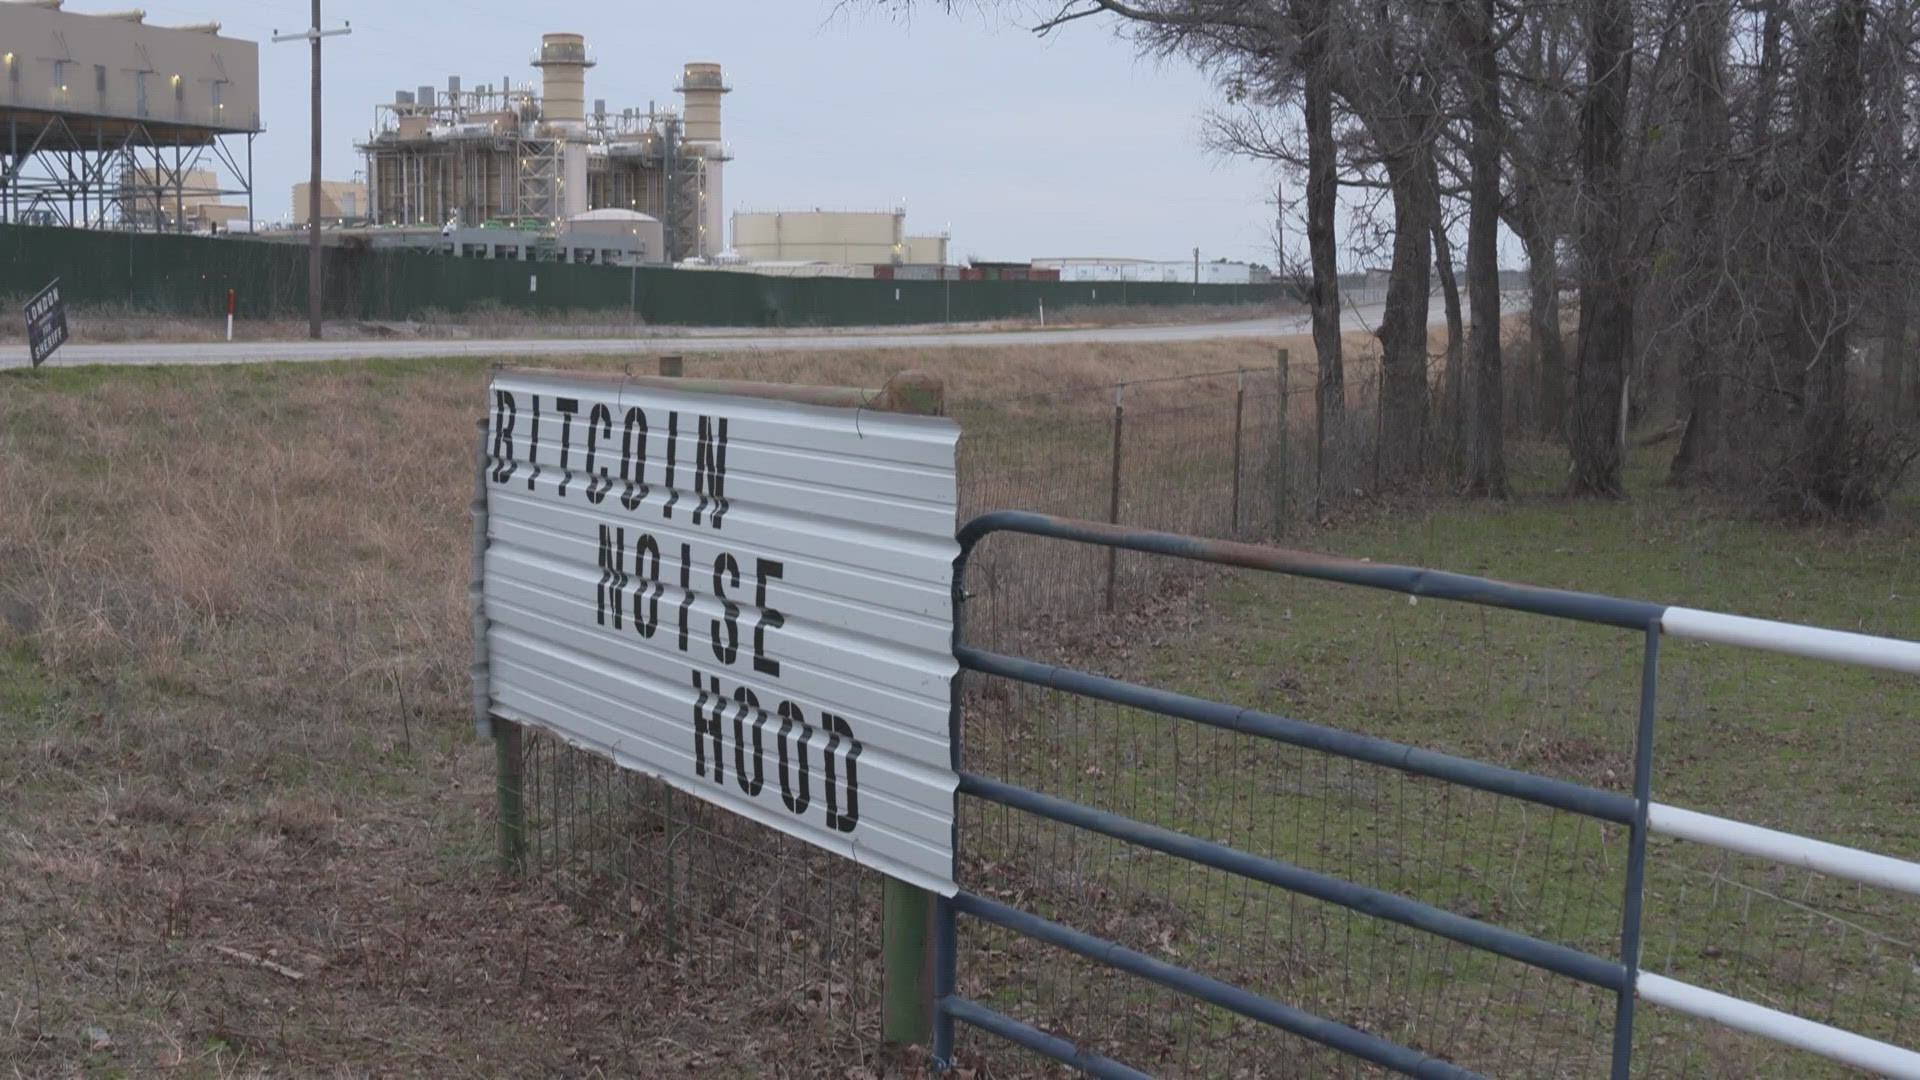 Granbury residents said a nearby Bitcoin mining facility creates loud noise 24/7, keeping them awake. Neighbors believe it's the cause of their health problems.